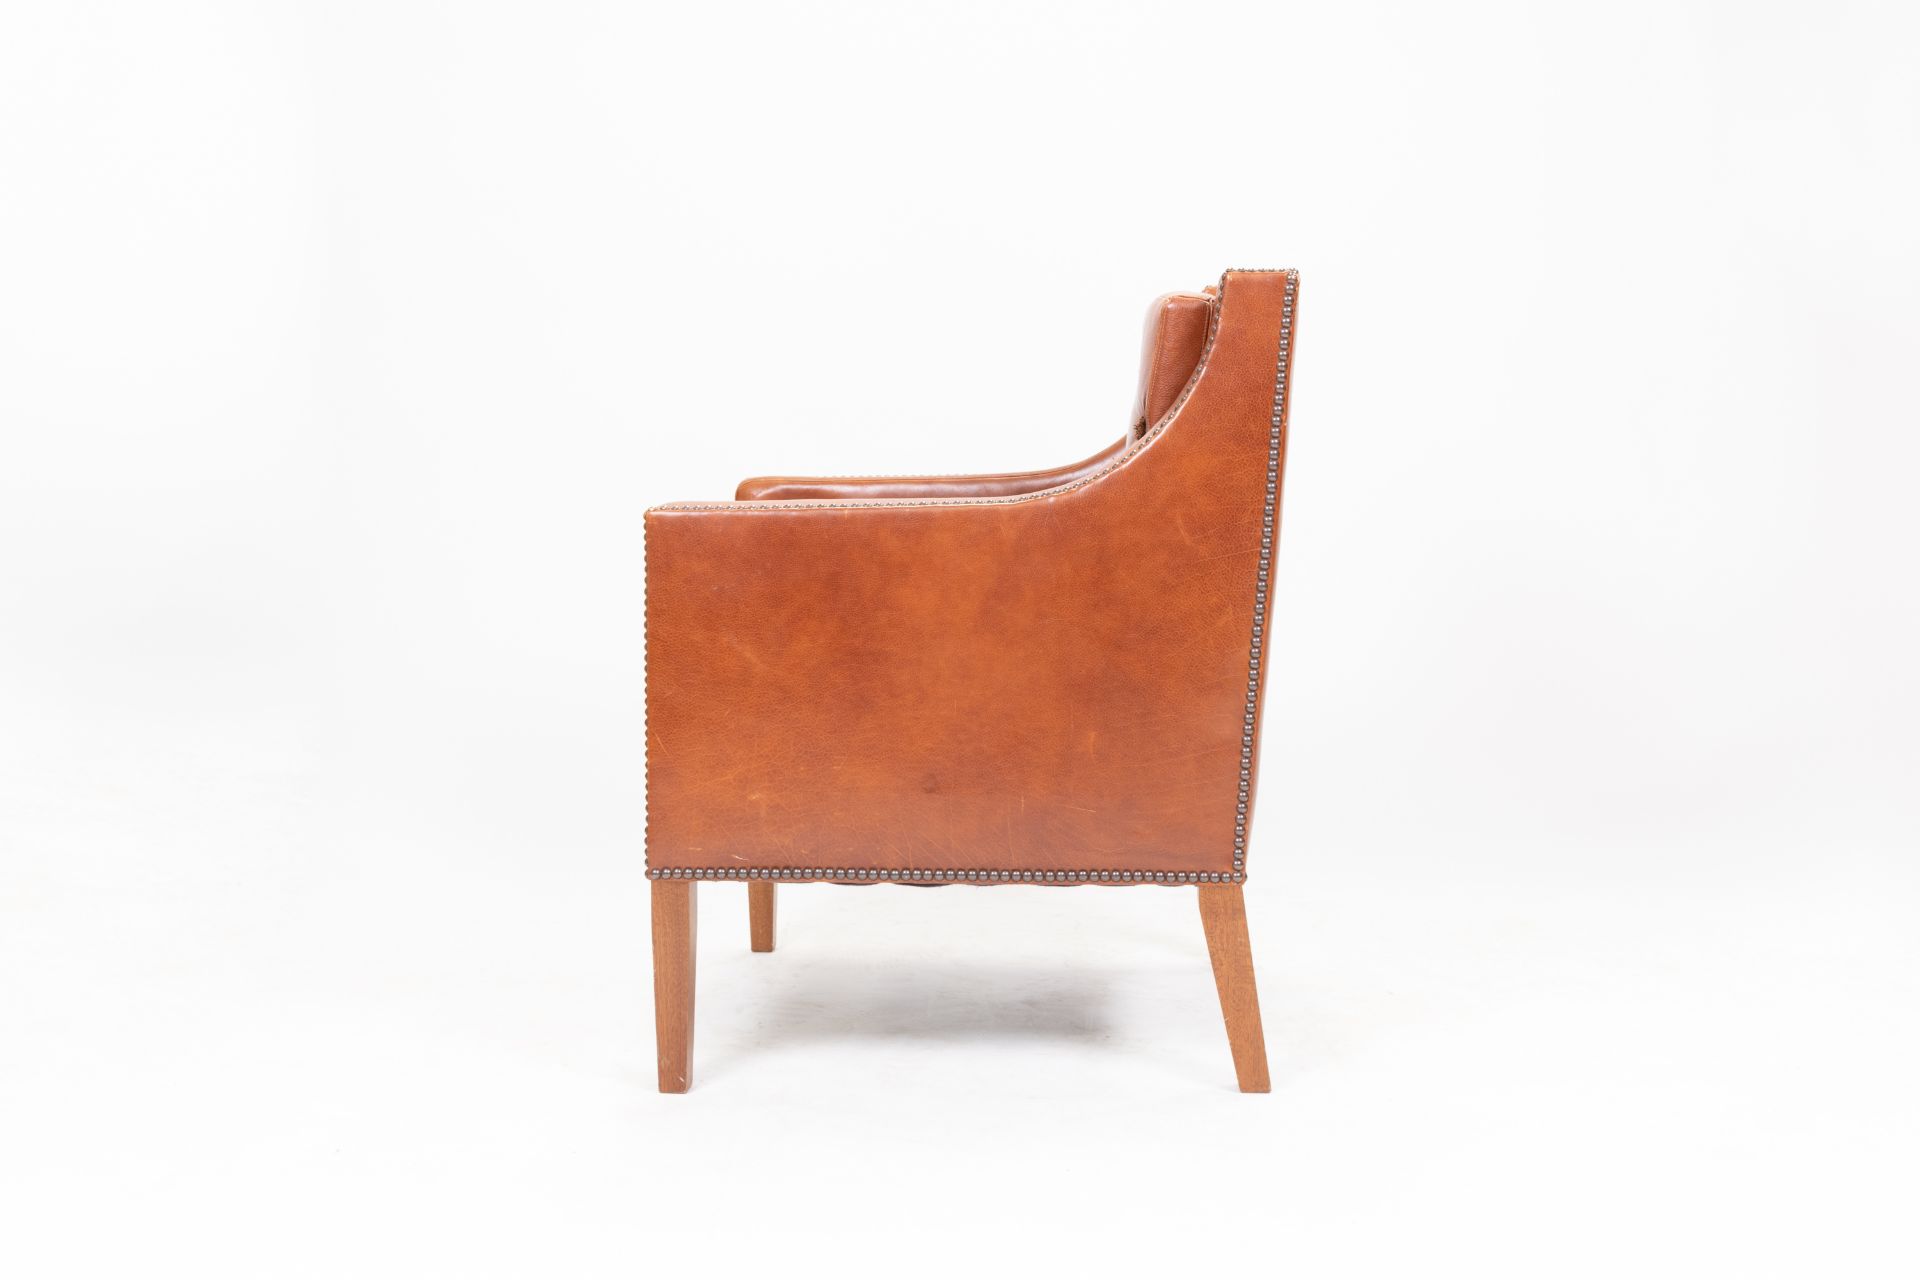 David Linley Lord Nelson Armchair - Image 7 of 8